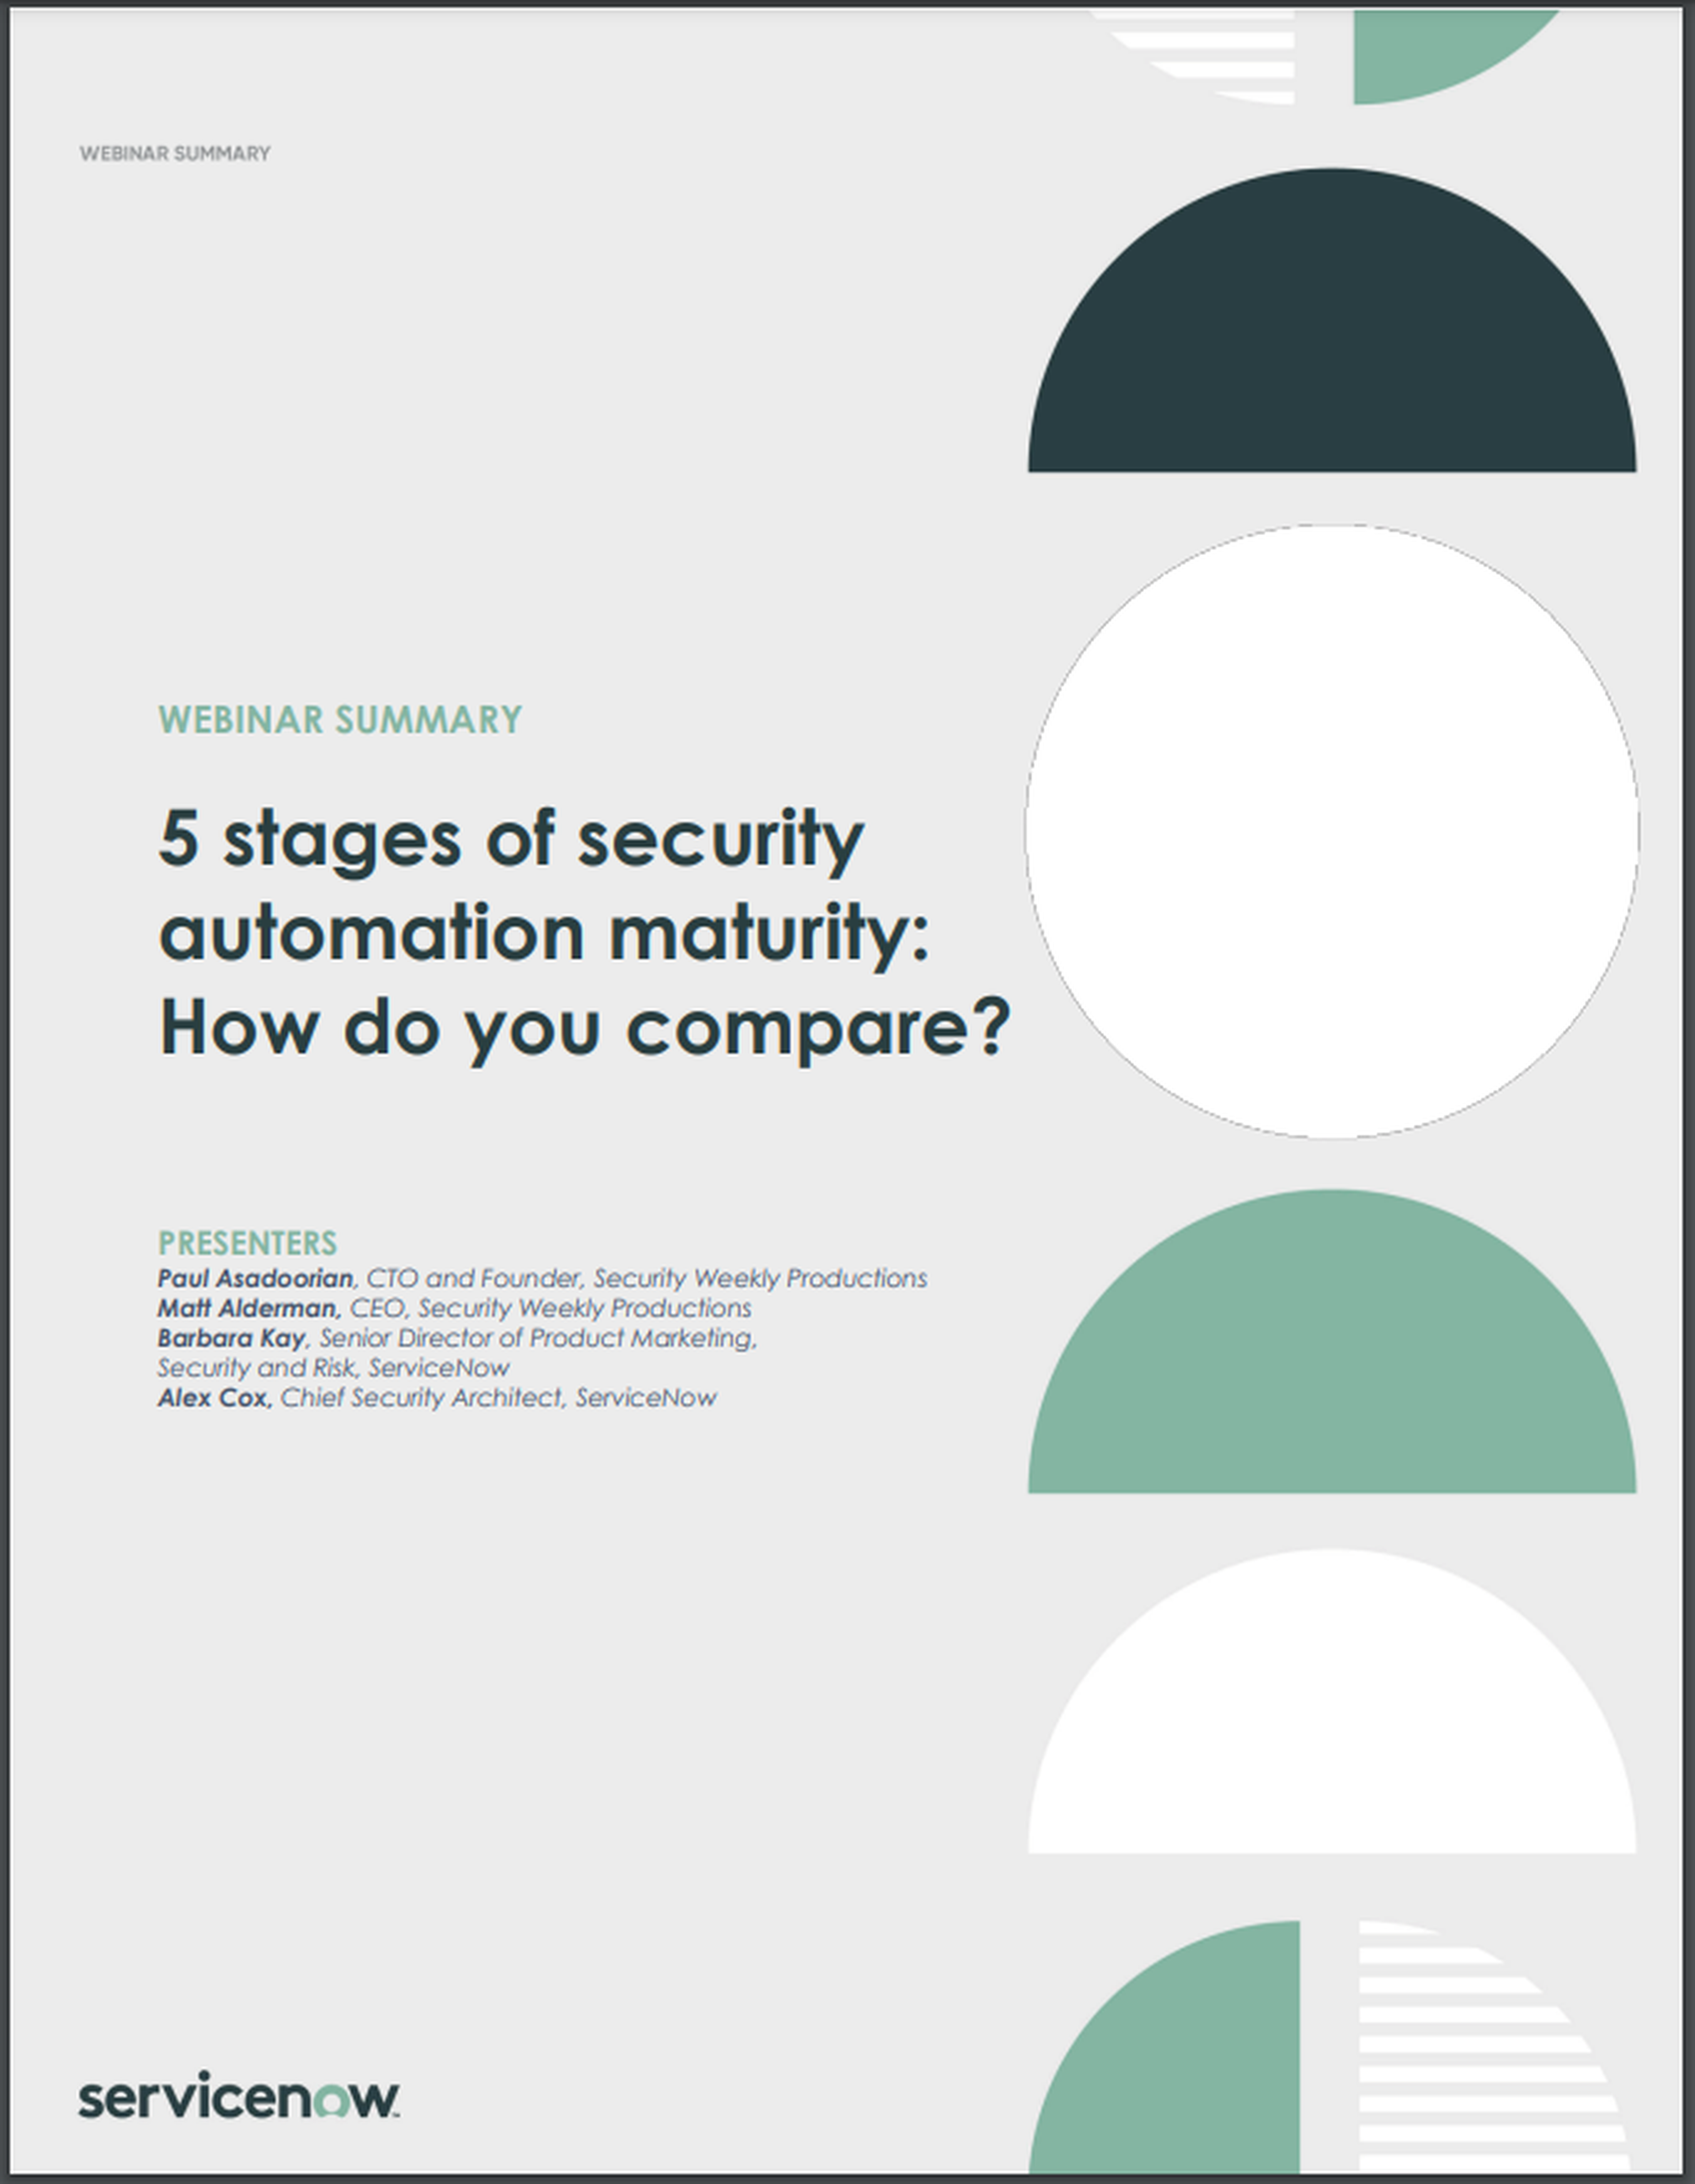 5 stages of security automation maturity: How do you compare?